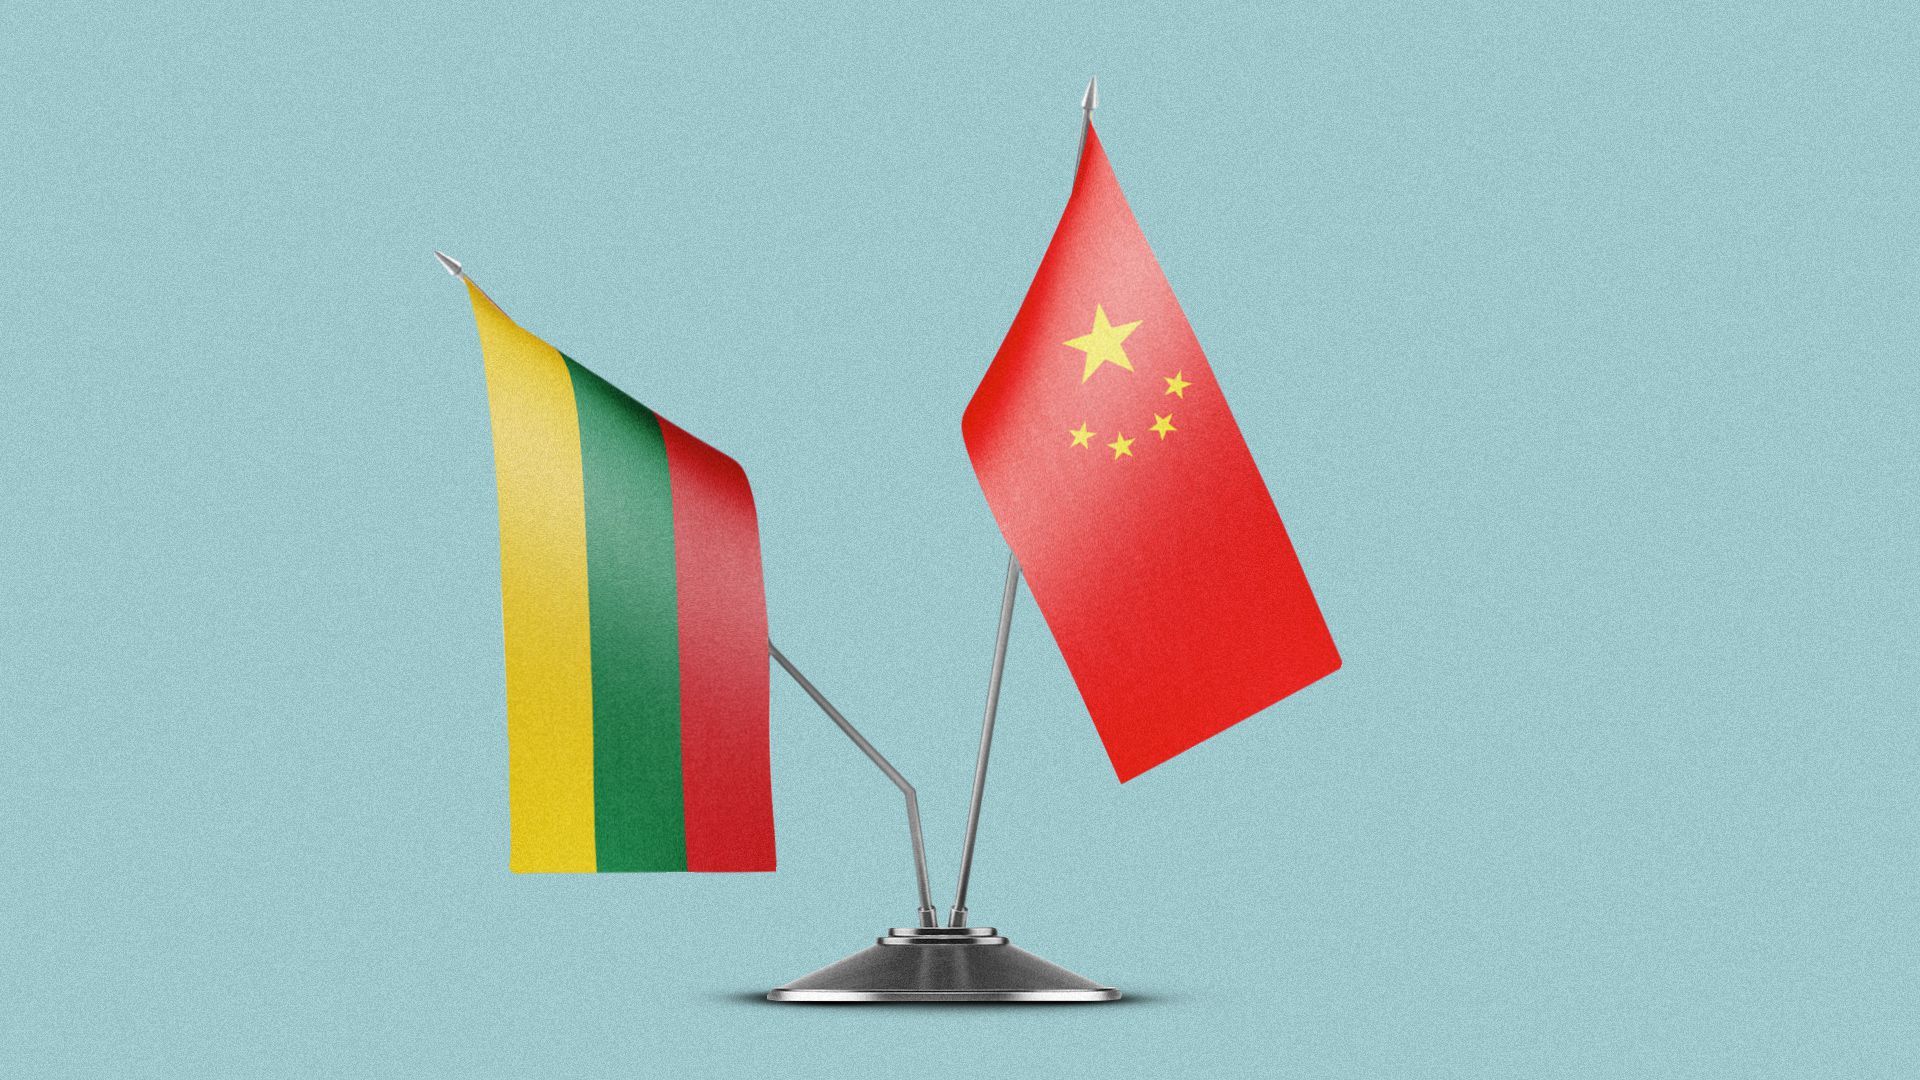 Illustration of a Lithuania and Chinese flag.